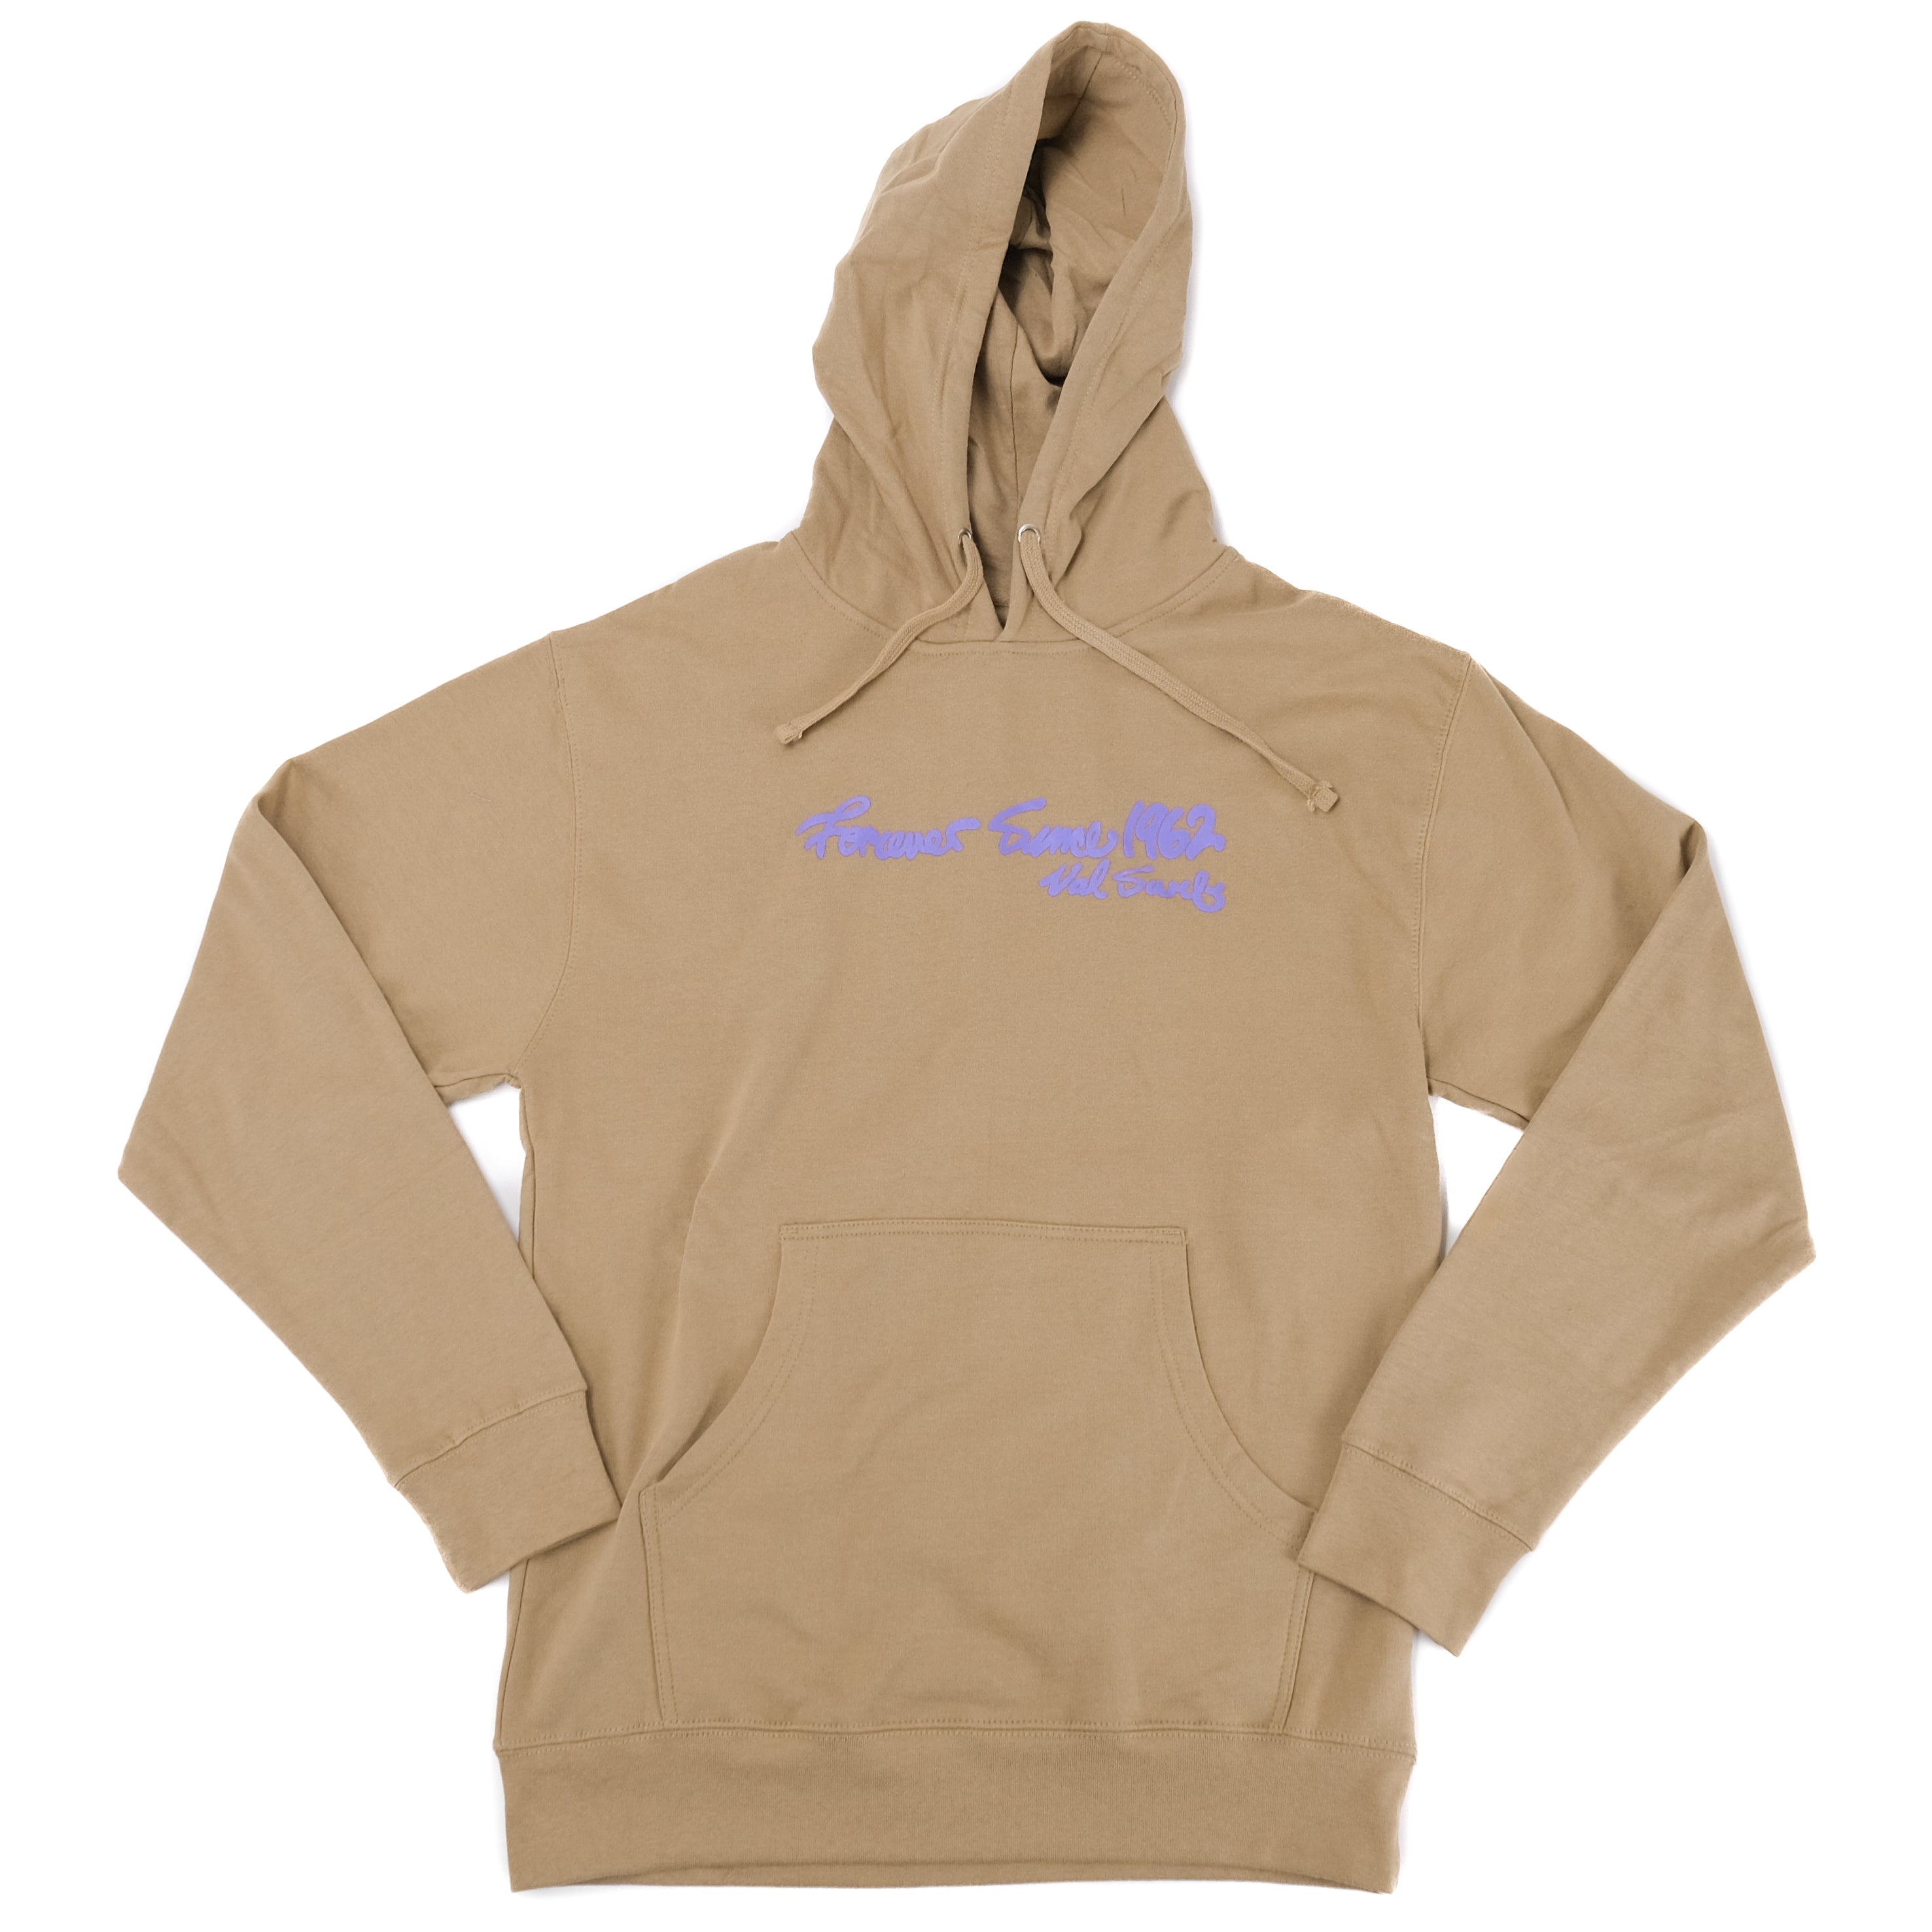 "Forever Since 1962" Midweight Hooded Pullover Sweatshirt - Sandstone